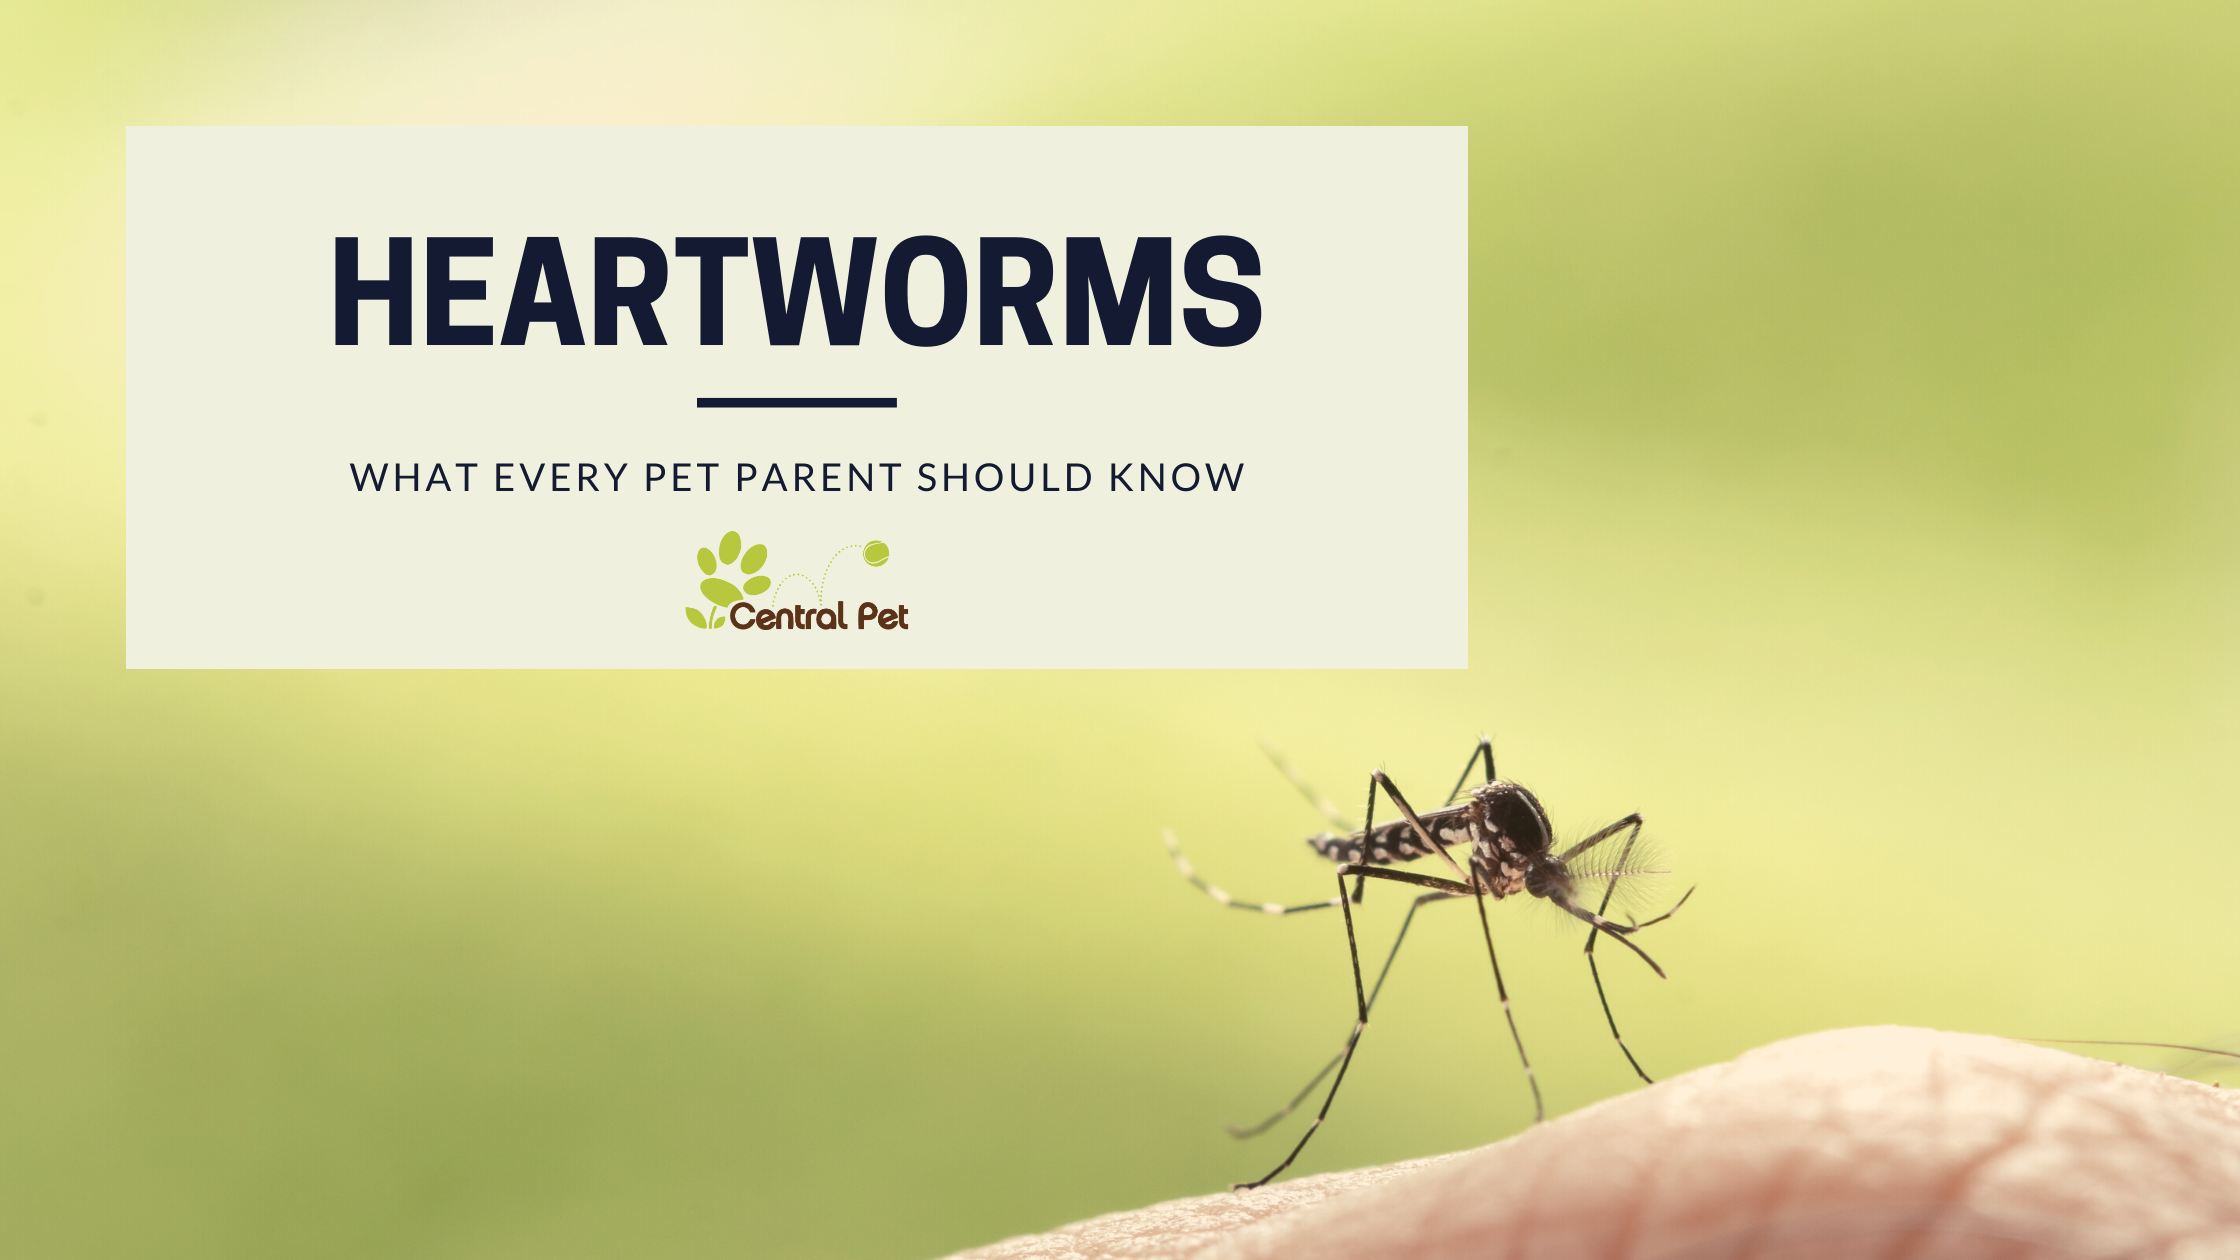 What Every Pet Parent Should Know About Heartworms